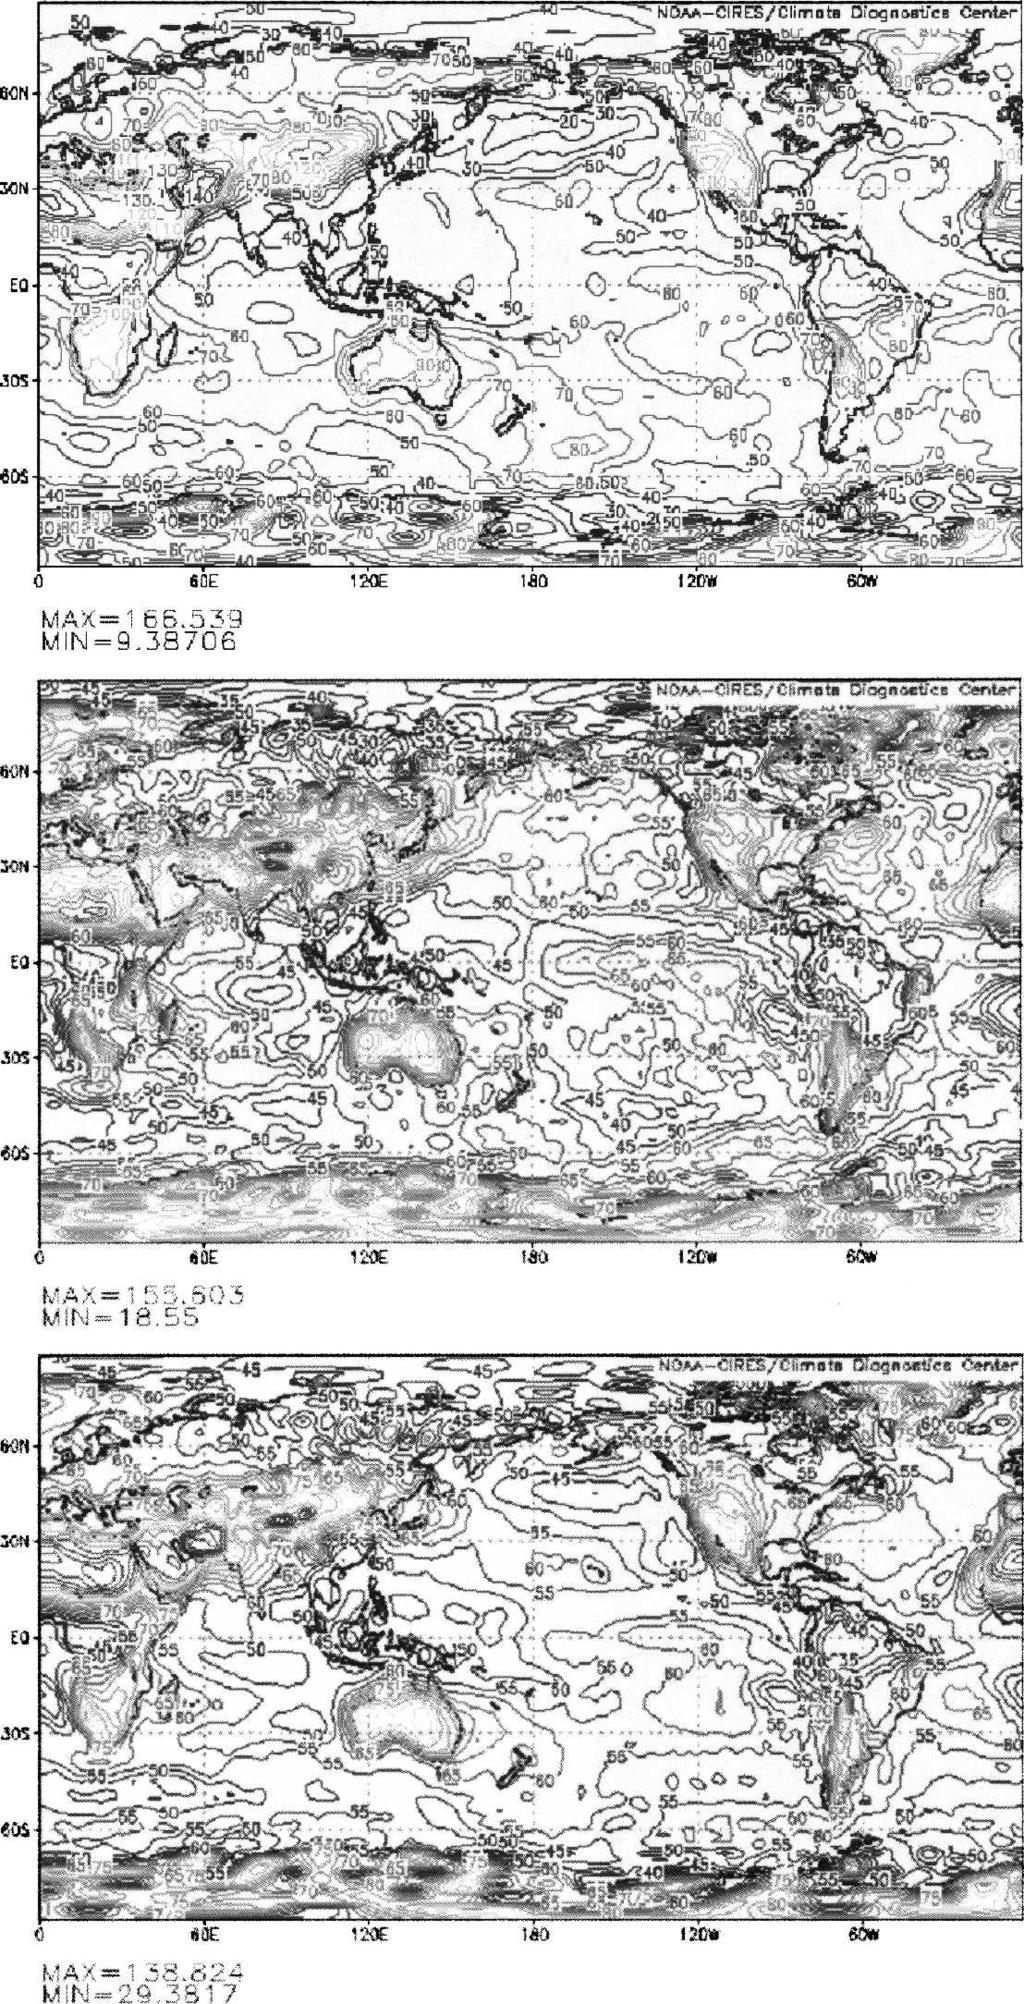 2868 J O U R N A L O F C L I M A T E VOLUME 19 FIG. 1. (a) NCEP NCAR reanalysis for July 2001, surface net longwave radiation. (b) Same as in (a), but for November 2001.